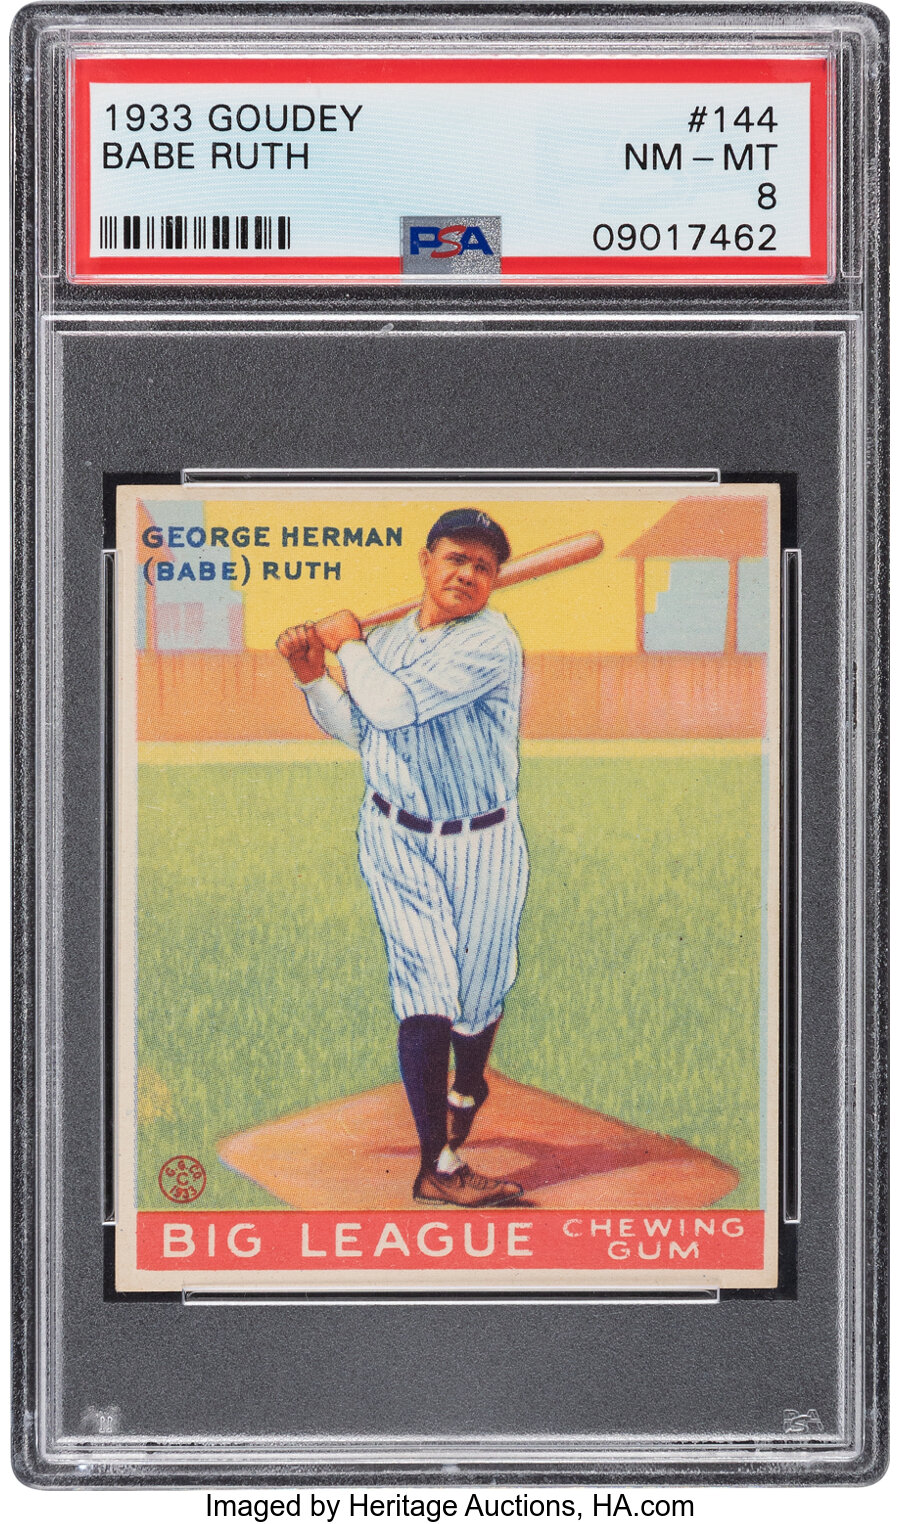 1933 Goudey Babe Ruth #144 PSA NM-MT 8 - Five Superior!